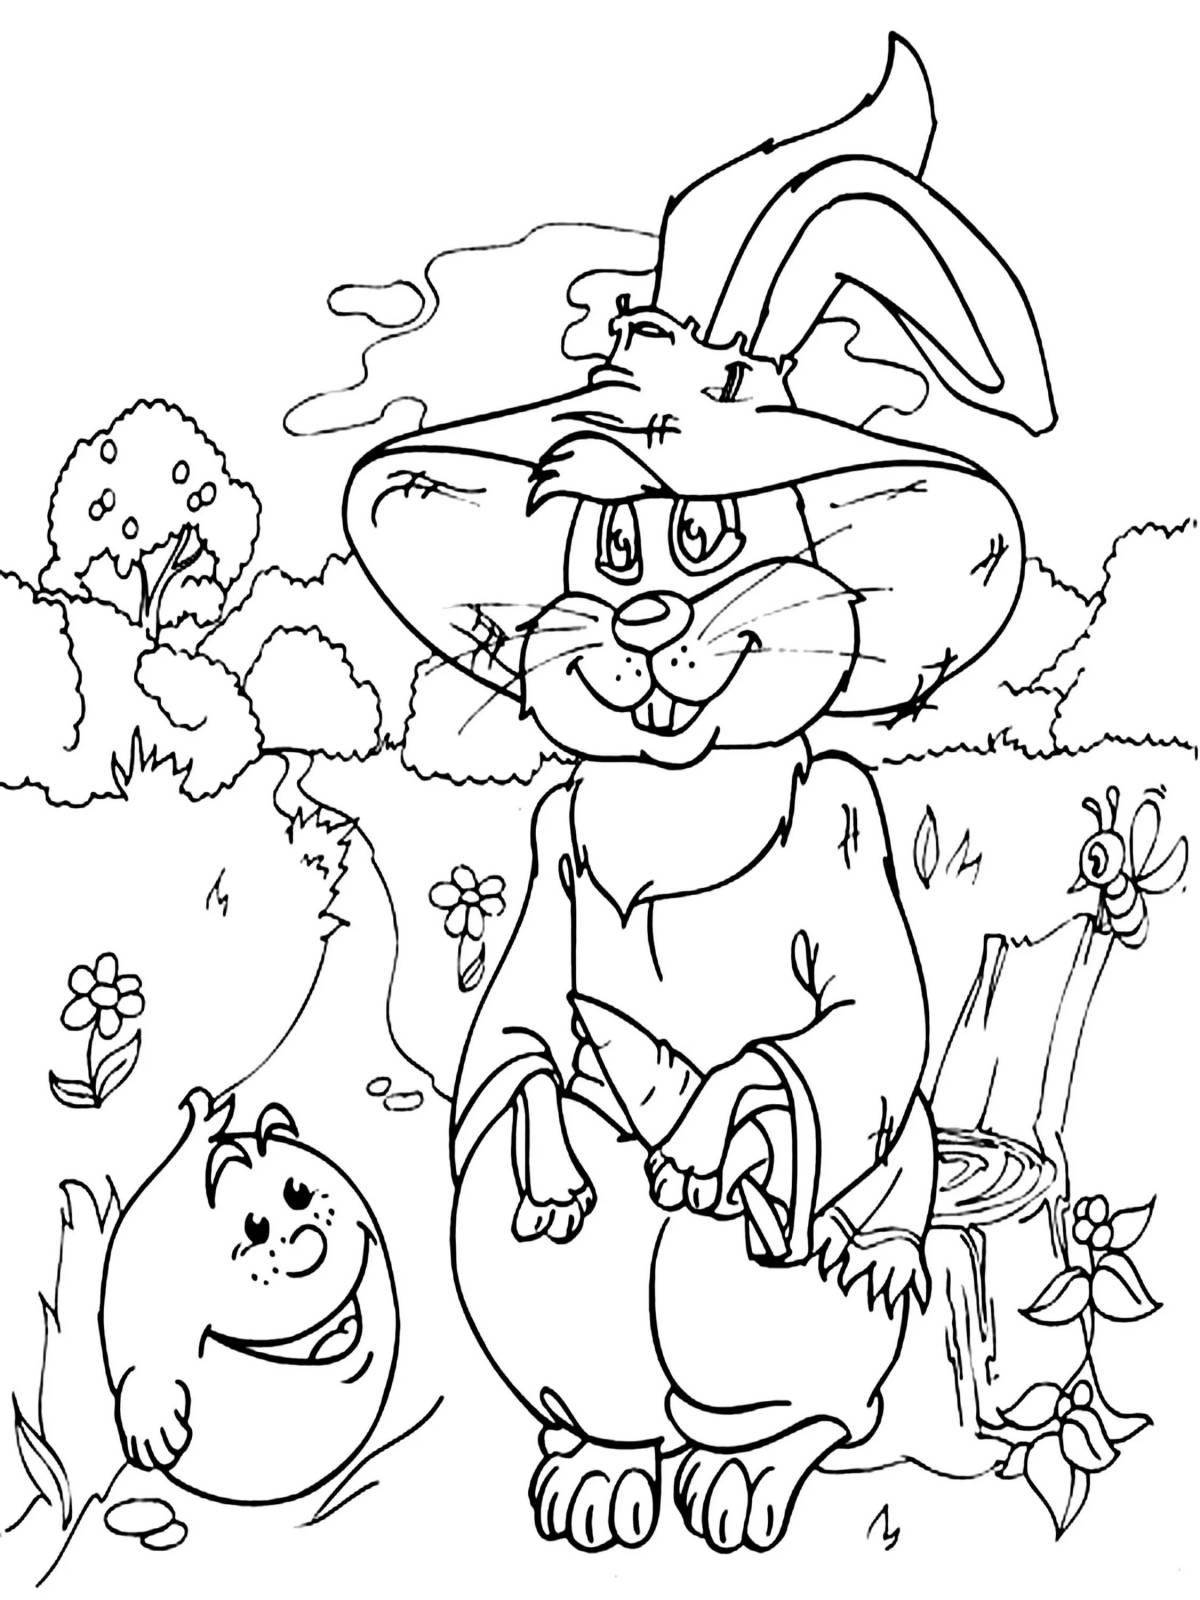 Fairy tale coloring book